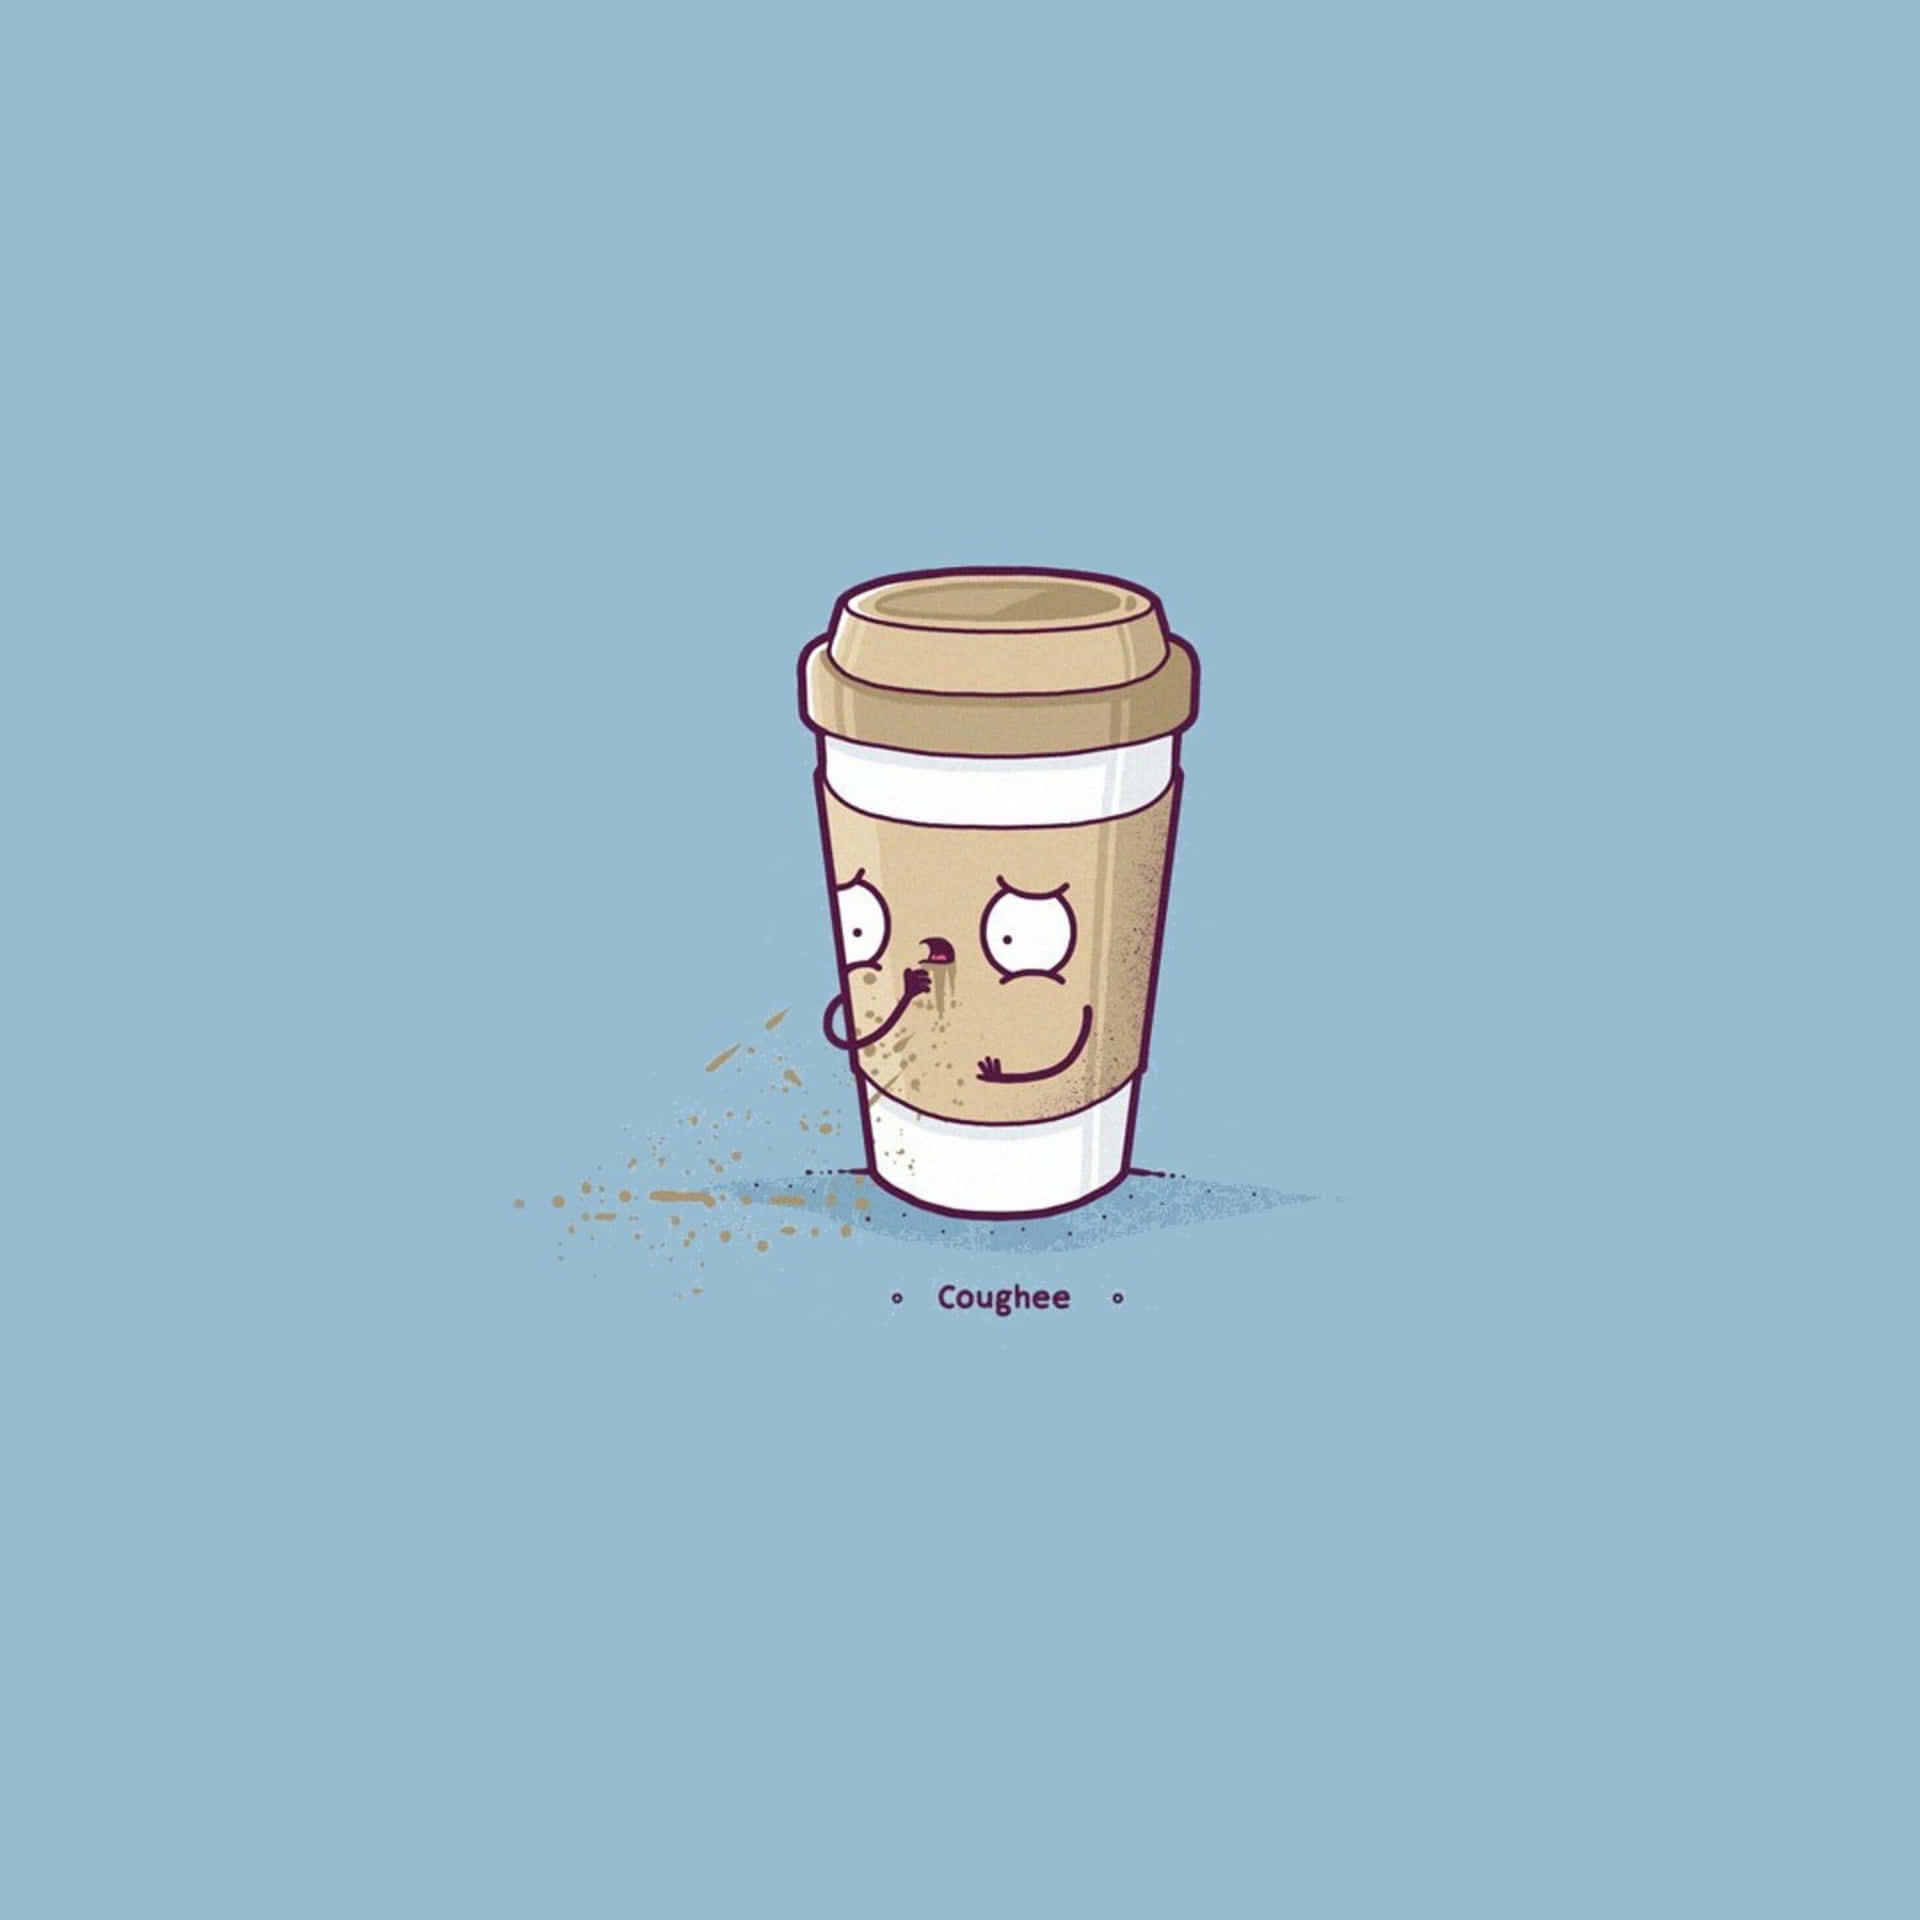 Get your daily dose of caffeine with this #cute coffee! Wallpaper